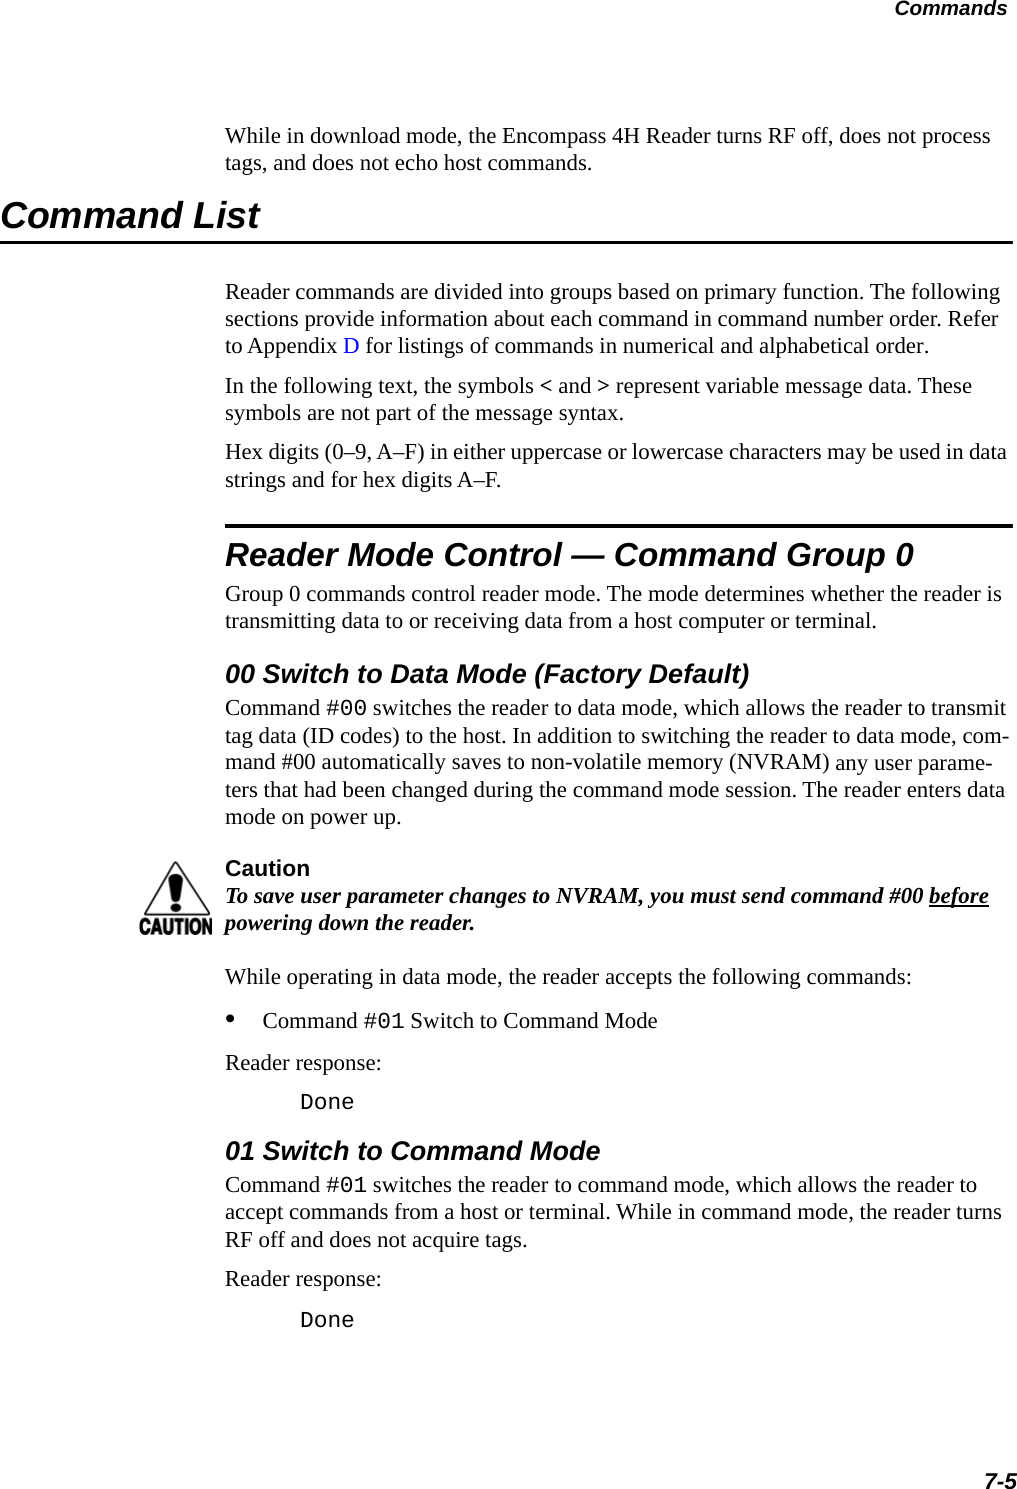 Commands7-5While in download mode, the Encompass 4H Reader turns RF off, does not process tags, and does not echo host commands.Command ListReader commands are divided into groups based on primary function. The following sections provide information about each command in command number order. Refer to Appendix D for listings of commands in numerical and alphabetical order.In the following text, the symbols &lt; and &gt; represent variable message data. These symbols are not part of the message syntax.Hex digits (0–9, A–F) in either uppercase or lowercase characters may be used in data strings and for hex digits A–F.Reader Mode Control — Command Group 0Group 0 commands control reader mode. The mode determines whether the reader is transmitting data to or receiving data from a host computer or terminal.00 Switch to Data Mode (Factory Default)Command #00 switches the reader to data mode, which allows the reader to transmit tag data (ID codes) to the host. In addition to switching the reader to data mode, com-mand #00 automatically saves to non-volatile memory (NVRAM) any user parame-ters that had been changed during the command mode session. The reader enters data mode on power up.CautionTo save user parameter changes to NVRAM, you must send command #00 before powering down the reader.While operating in data mode, the reader accepts the following commands: •Command #01 Switch to Command Mode Reader response:Done01 Switch to Command ModeCommand #01 switches the reader to command mode, which allows the reader to accept commands from a host or terminal. While in command mode, the reader turns RF off and does not acquire tags.Reader response:Done